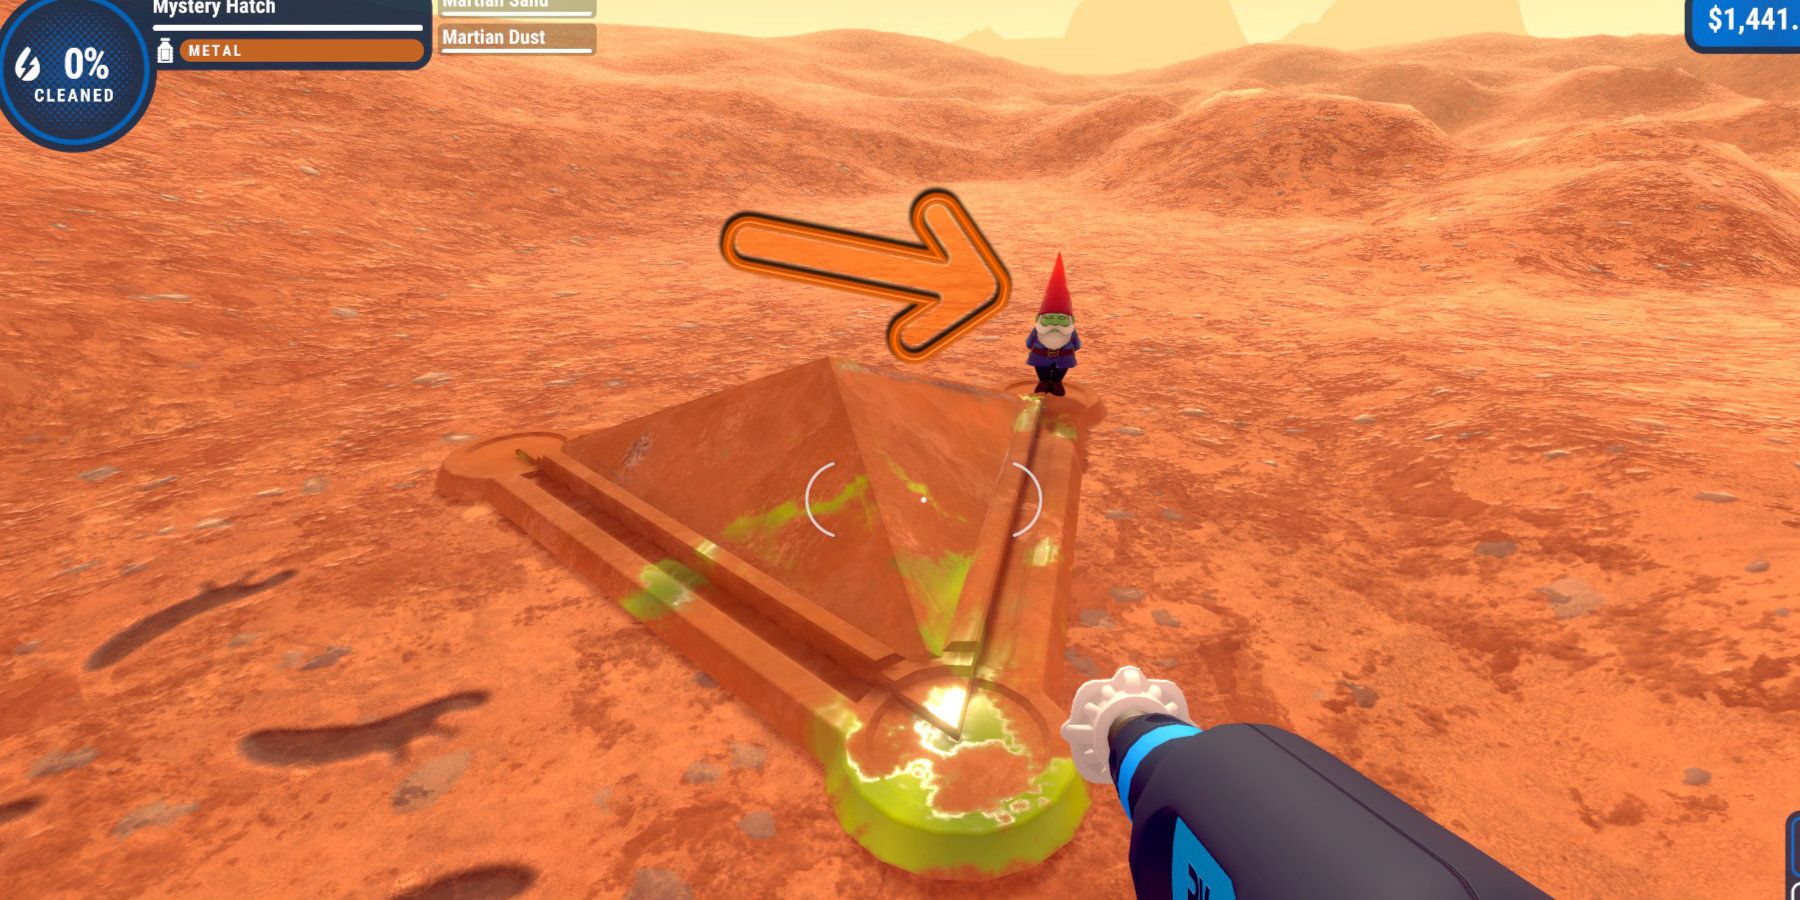 A green garden gnome standing next to a hatch on Mars, highlighted by an arrow.